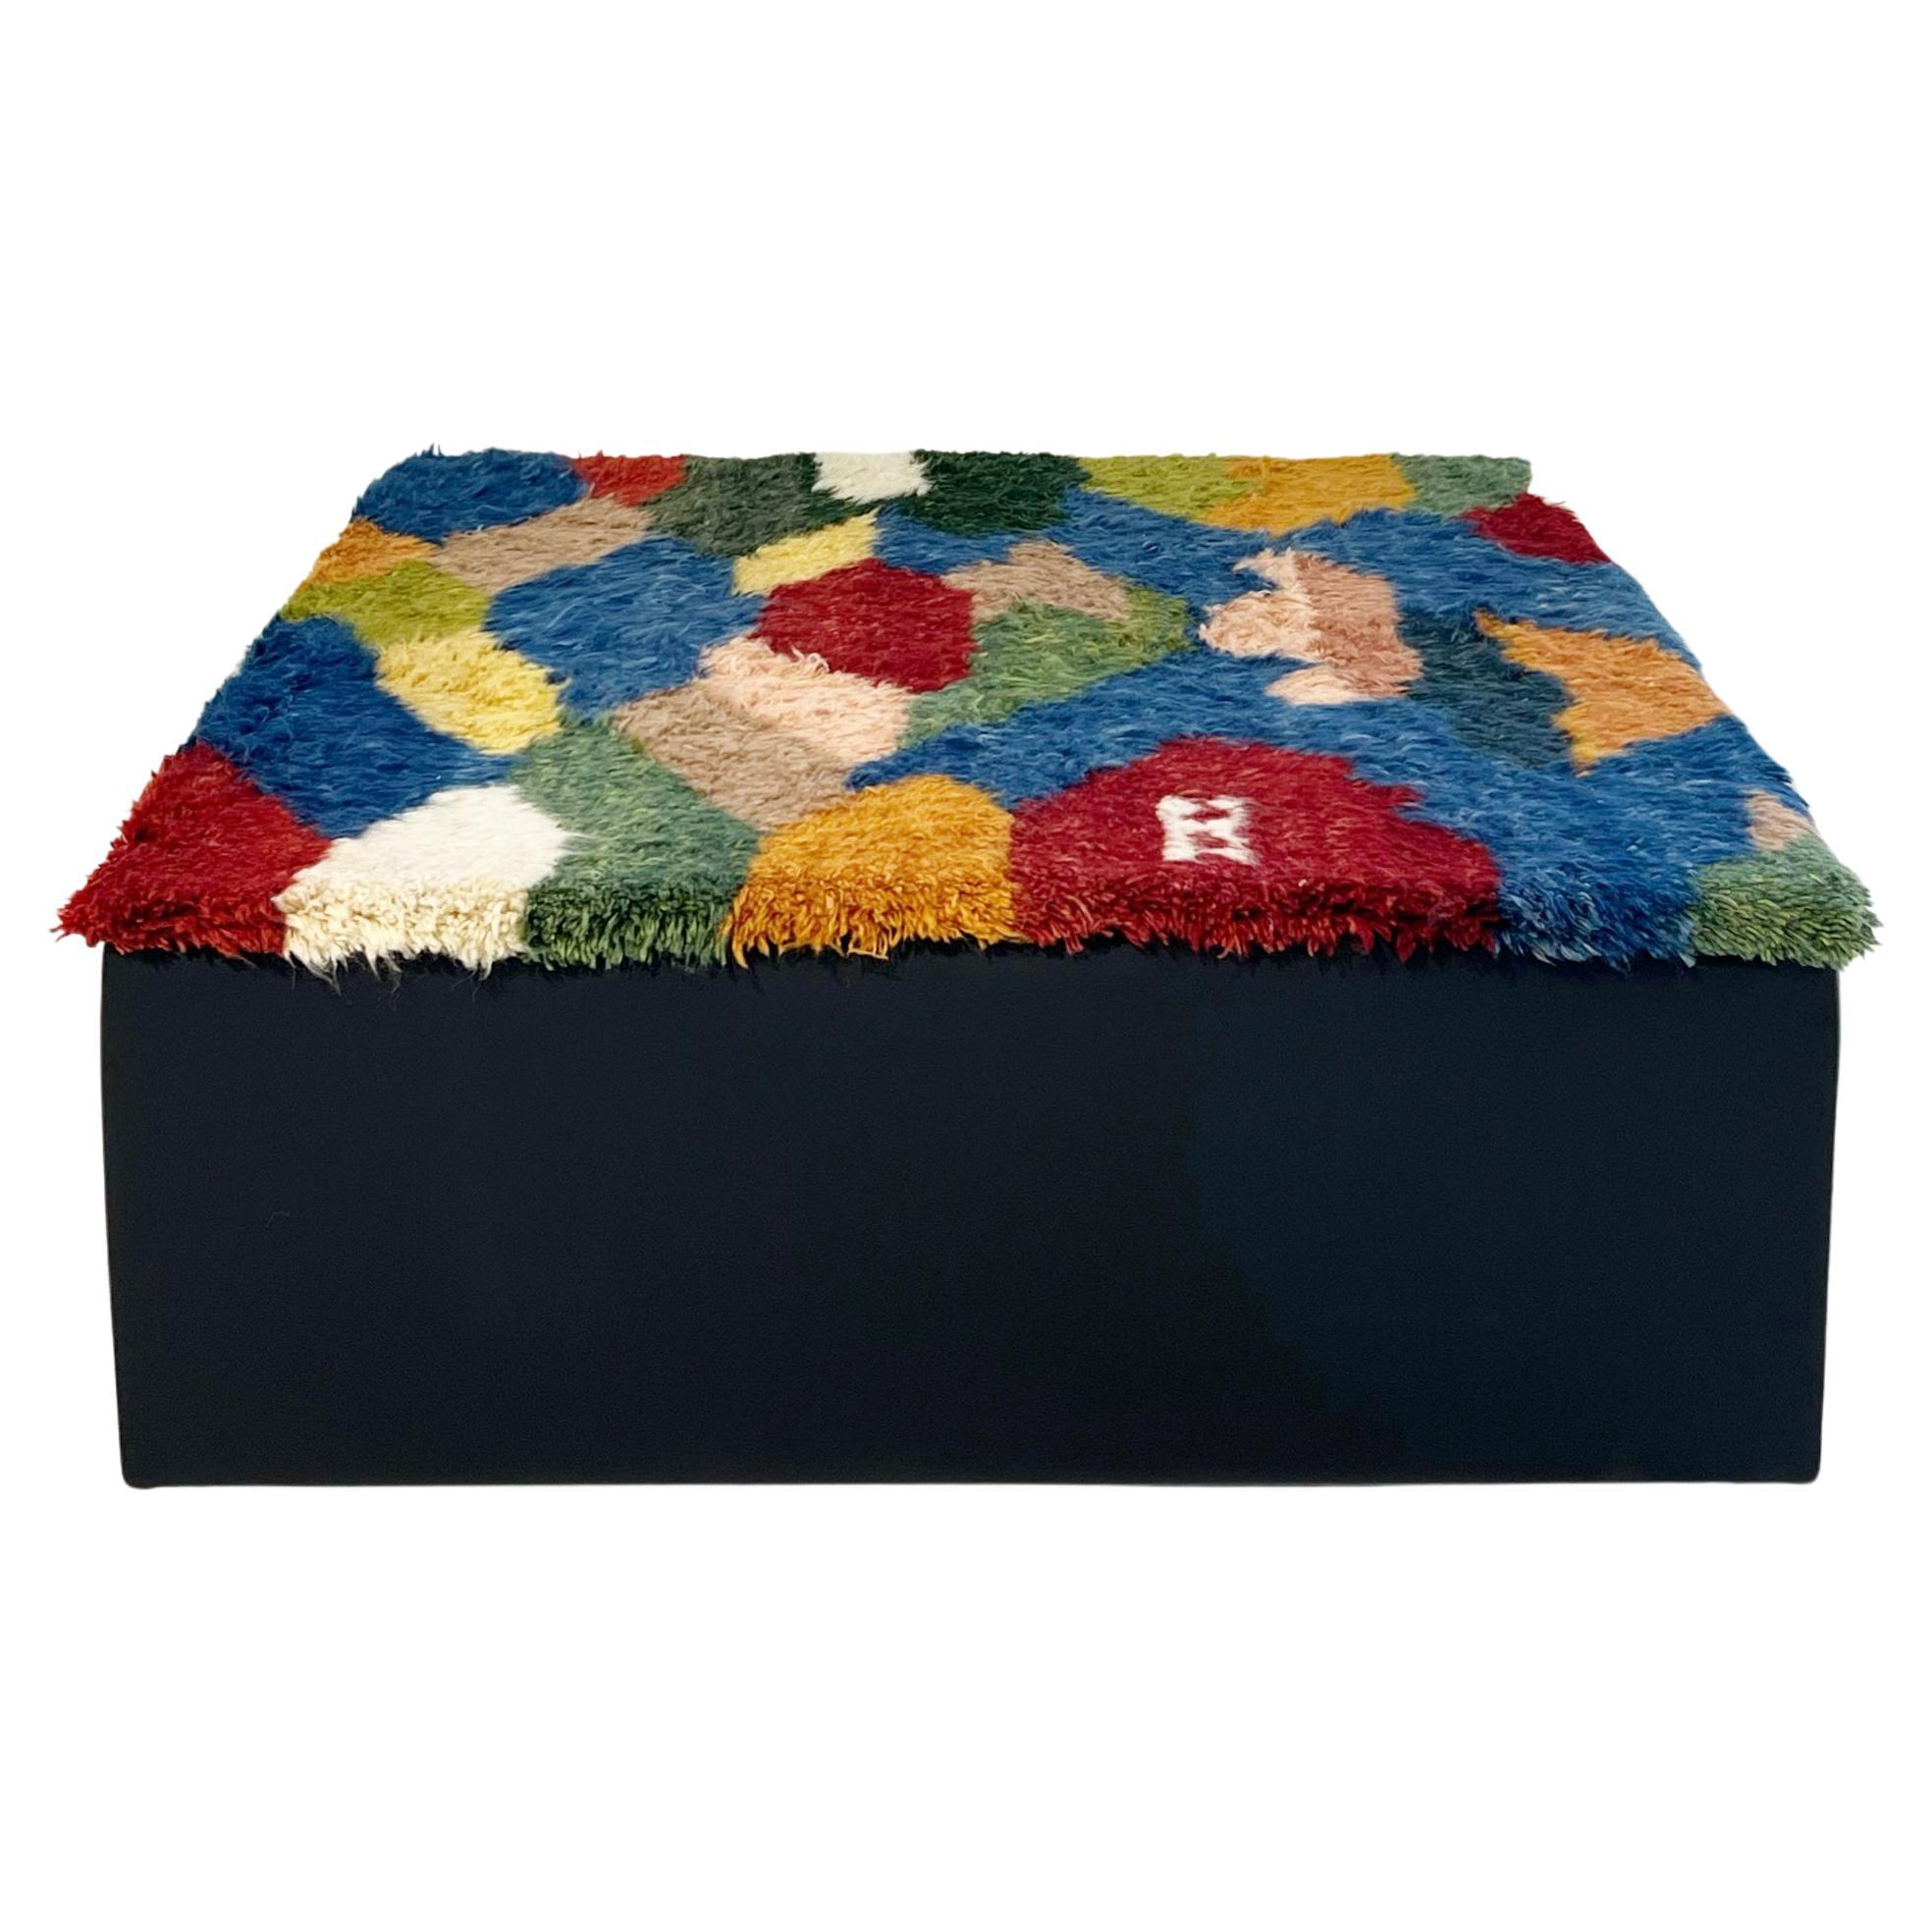 Forsyth One-of-a-kind Ottoman with Vintage Qashqai Gabbeh Rug from Iran For Sale